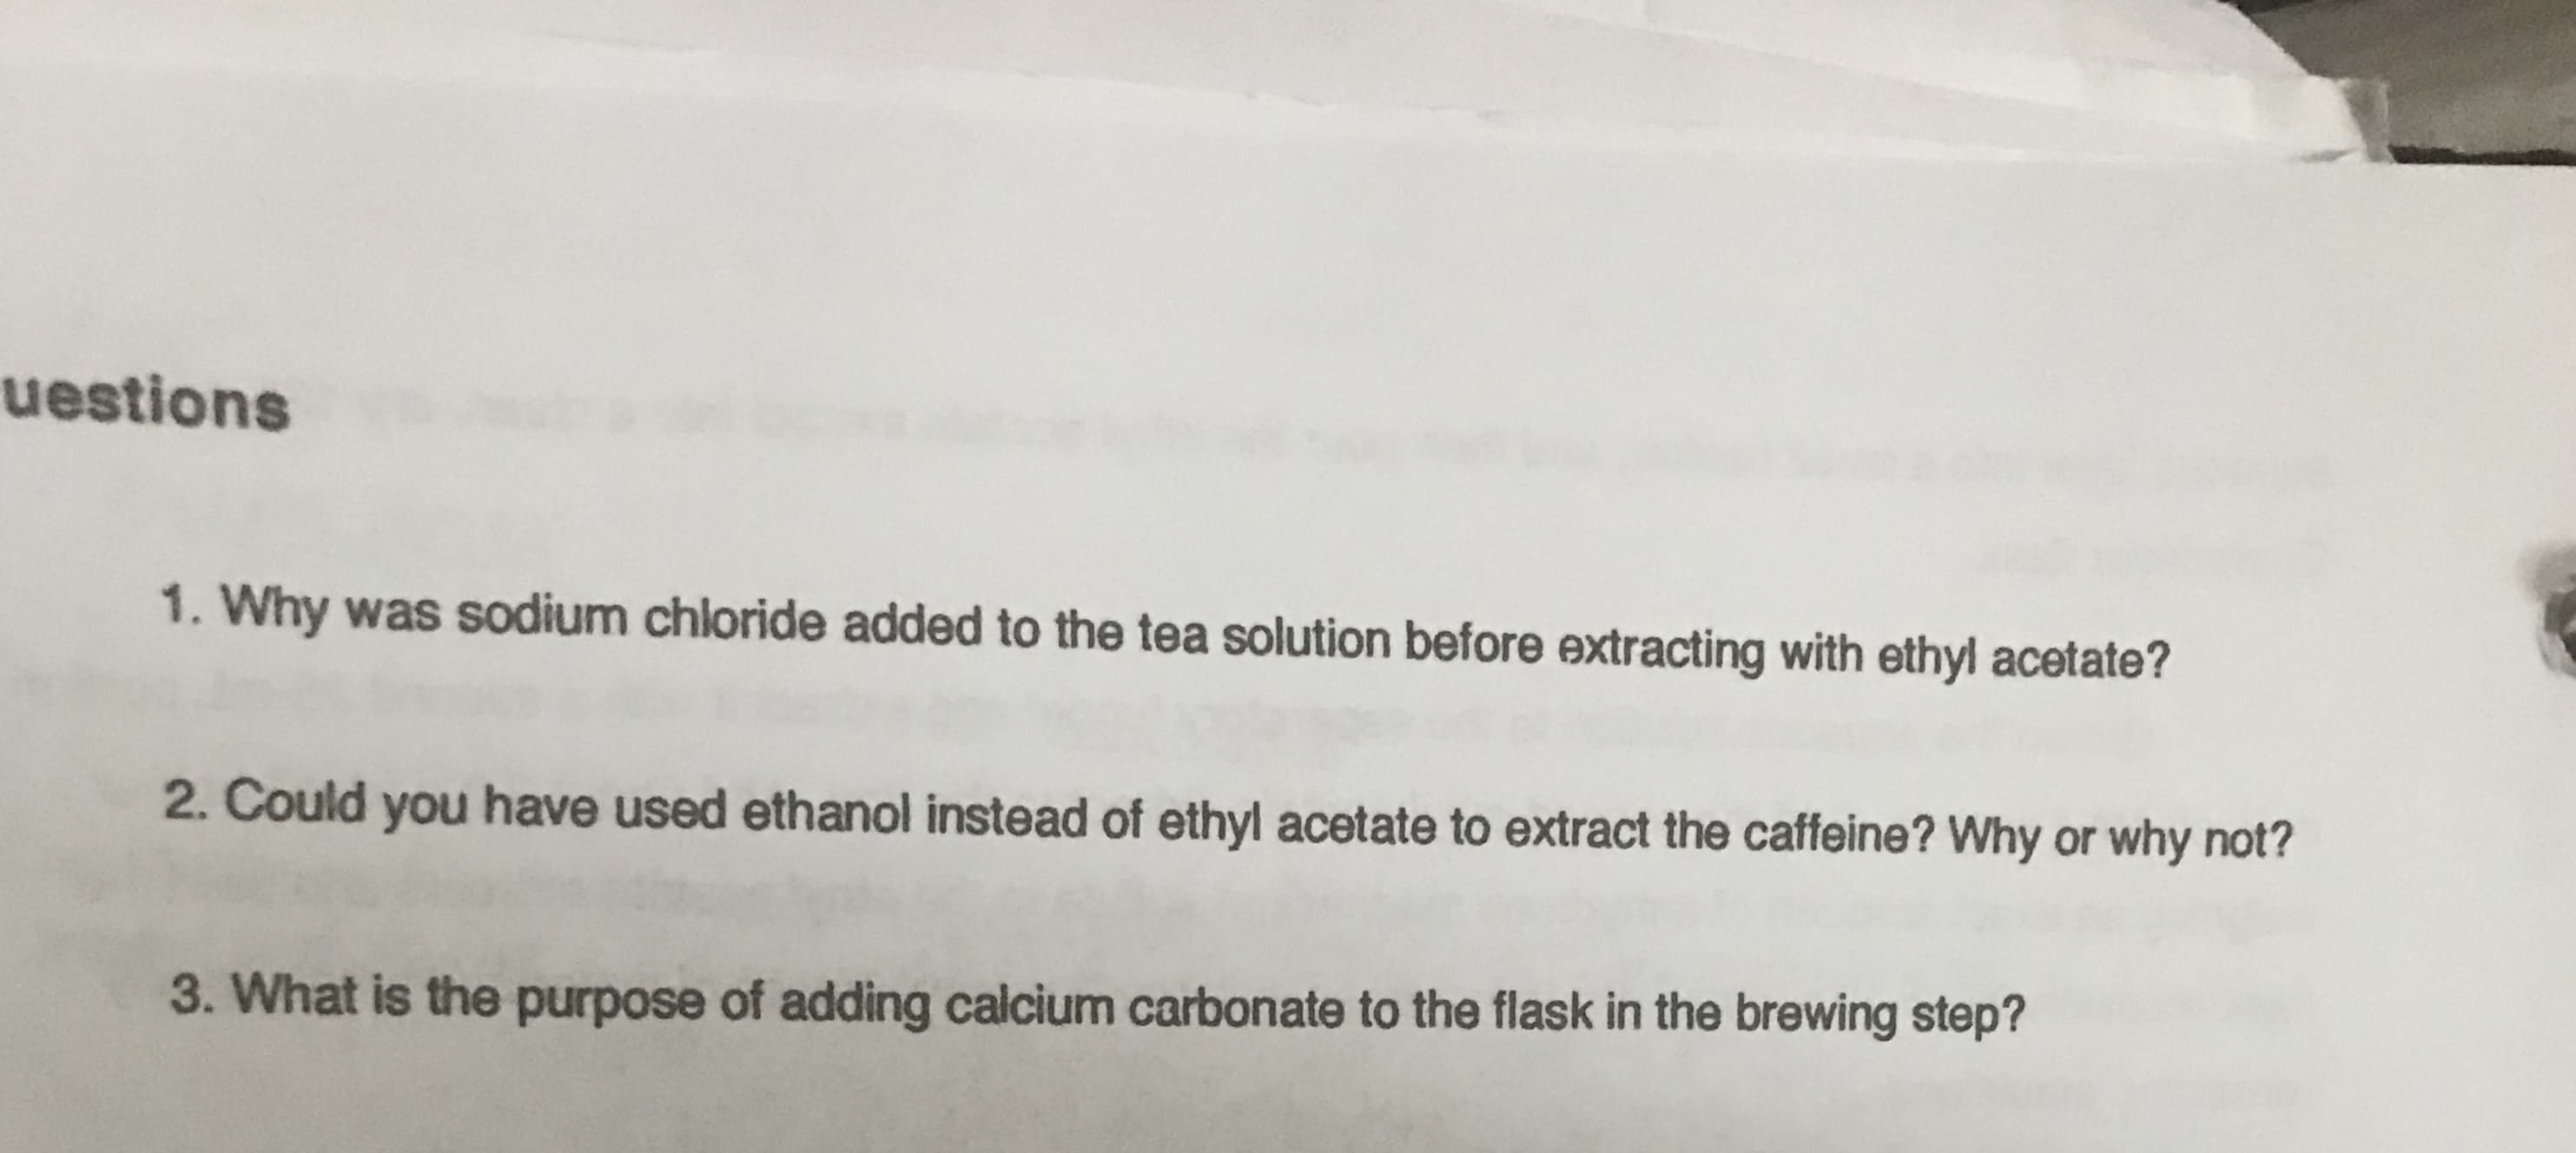 uestions
1. Why was sodium chloride added to the tea solution before extracting with ethyl acetate?
2. Could you have used ethanol instead of ethyl acetate to extract the caffeine? Why or why not?
3. What is the purpose of adding calcium carbonate to the flask in the brewing step?
